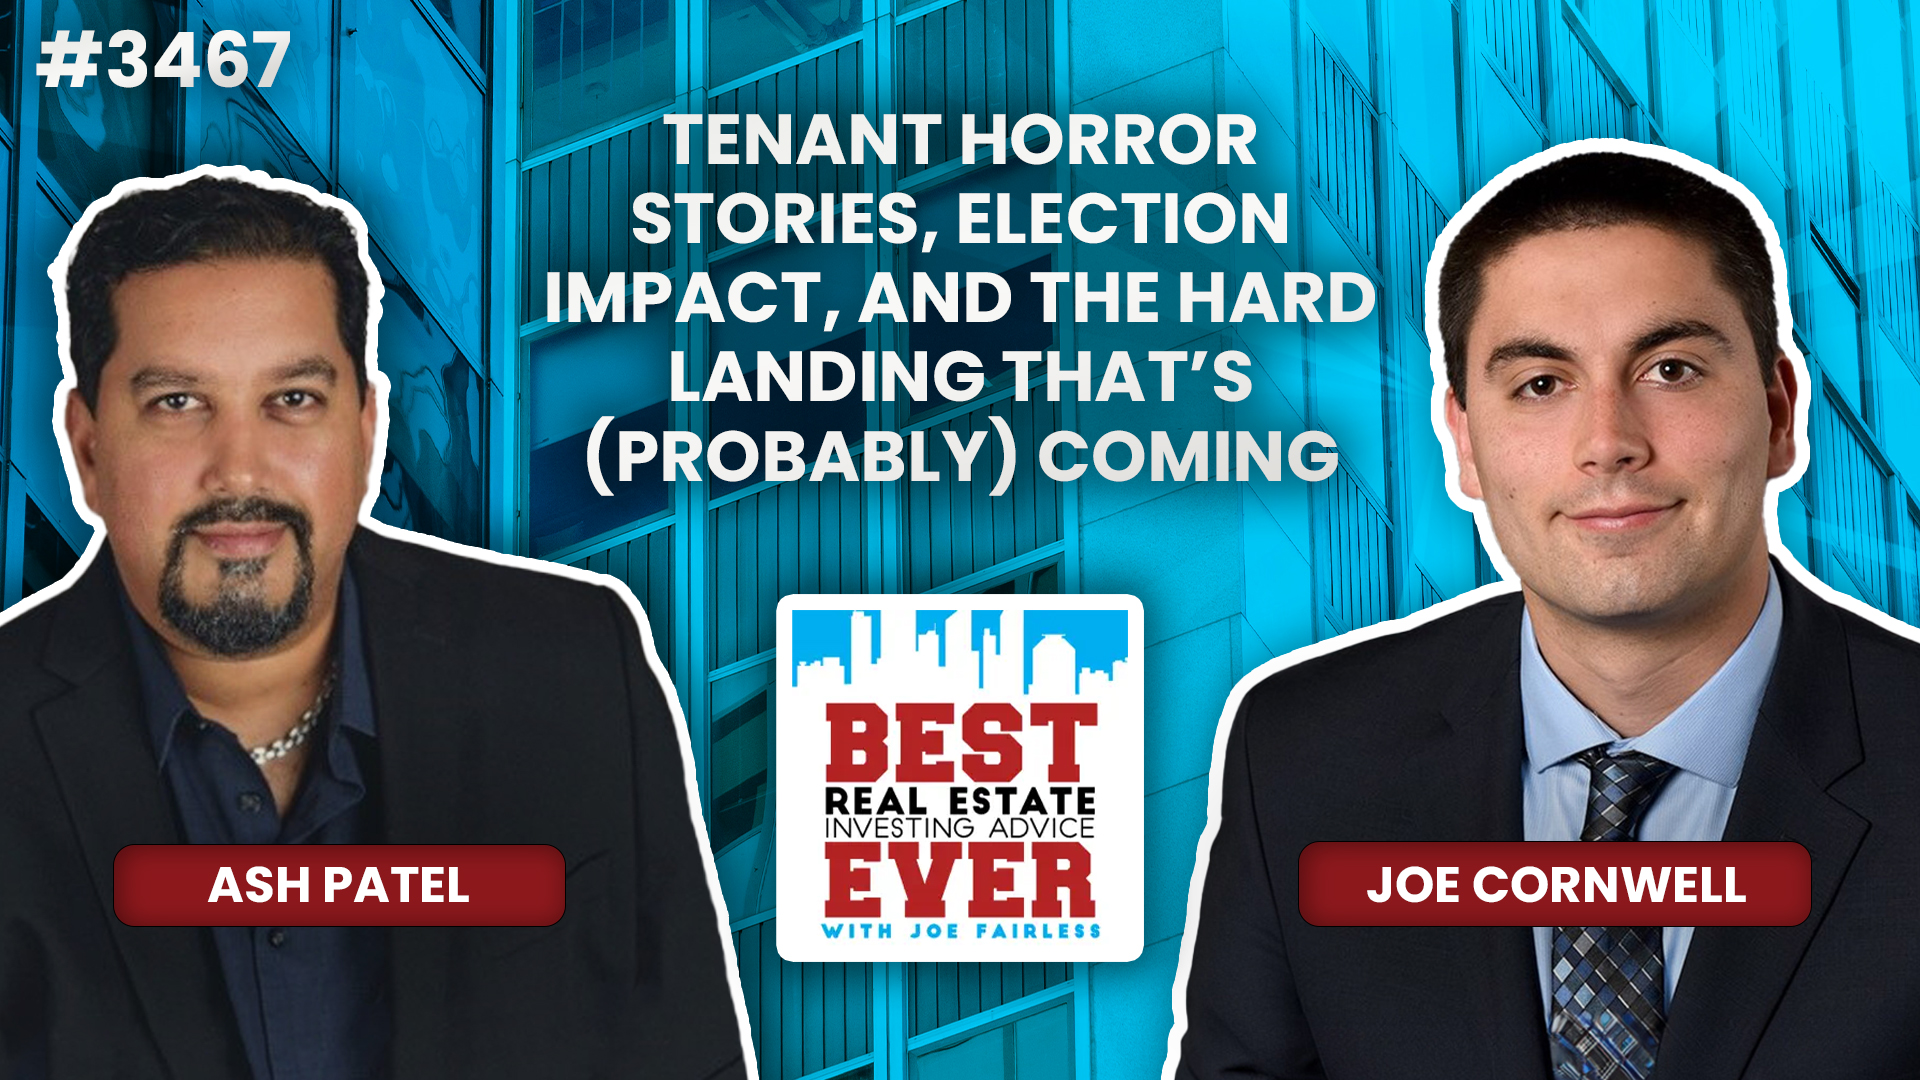 JF3467: Tenant Horror Stories, Election Impact, and the Hard Landing That’s (Probably) Coming ft. Ash Patel and Joe Cornwell